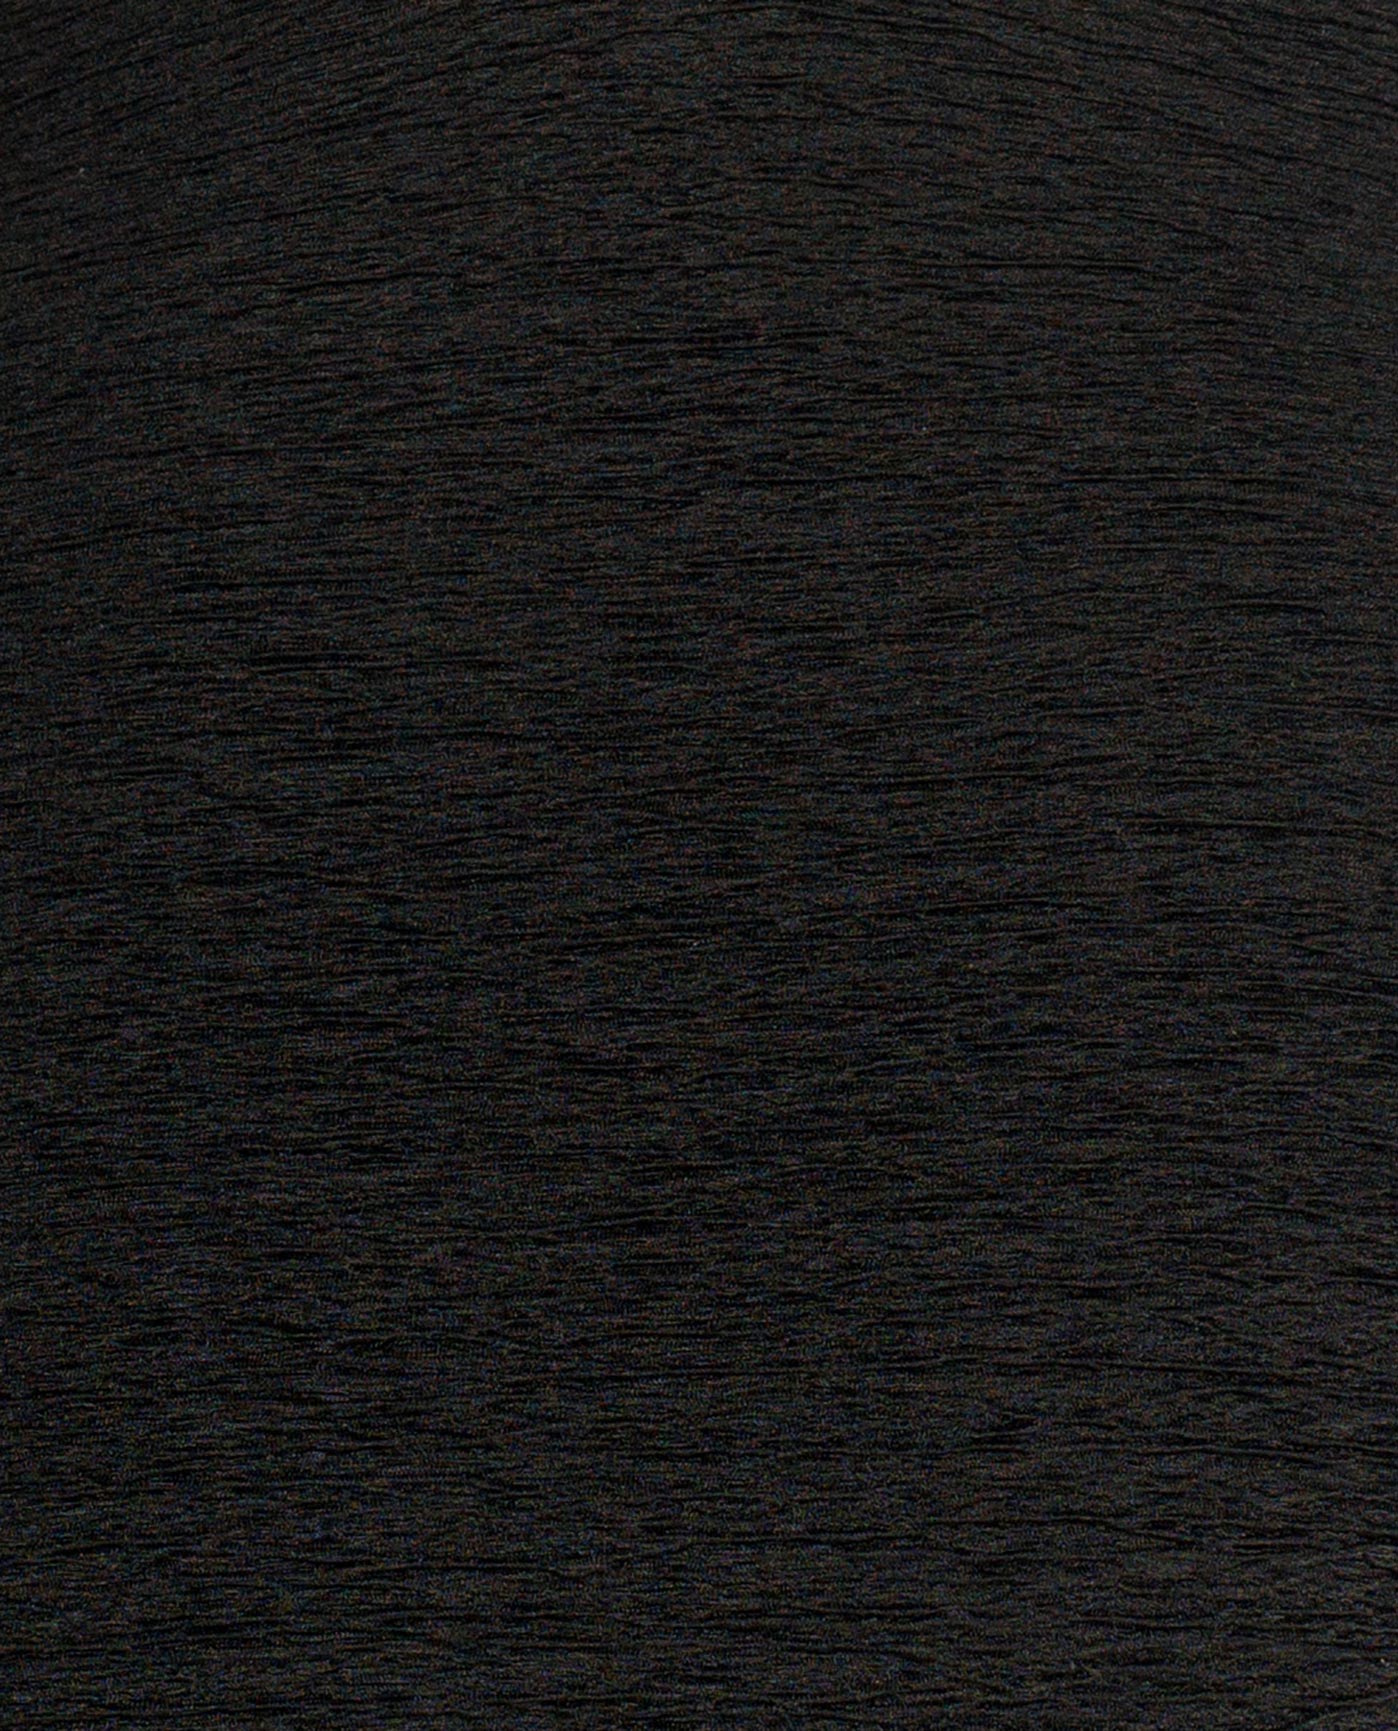 FABRIC SWATCH VIEW OF CHLORINE RESISTANT KRINKLE TEXTURED SOLID EMPIRE MIO MASTECTOMY ONE PIECE | KRINKLE BLACK 2023